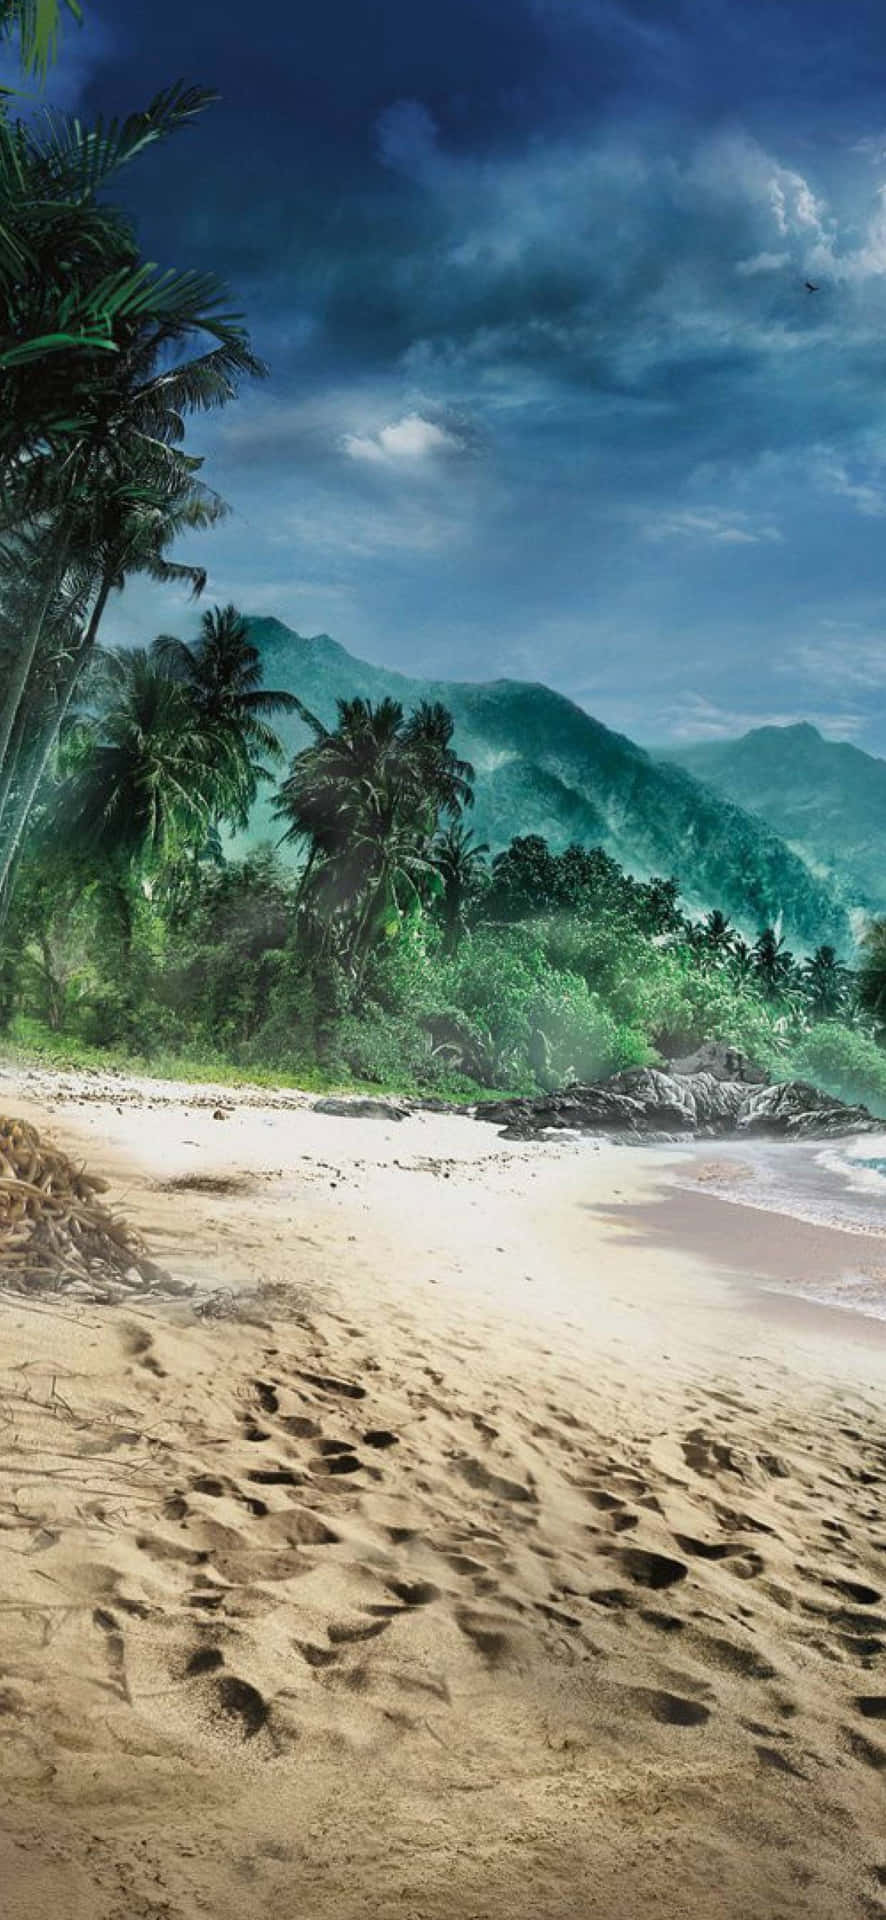 iPhone X Far Cry 3 Beach With Trees Background